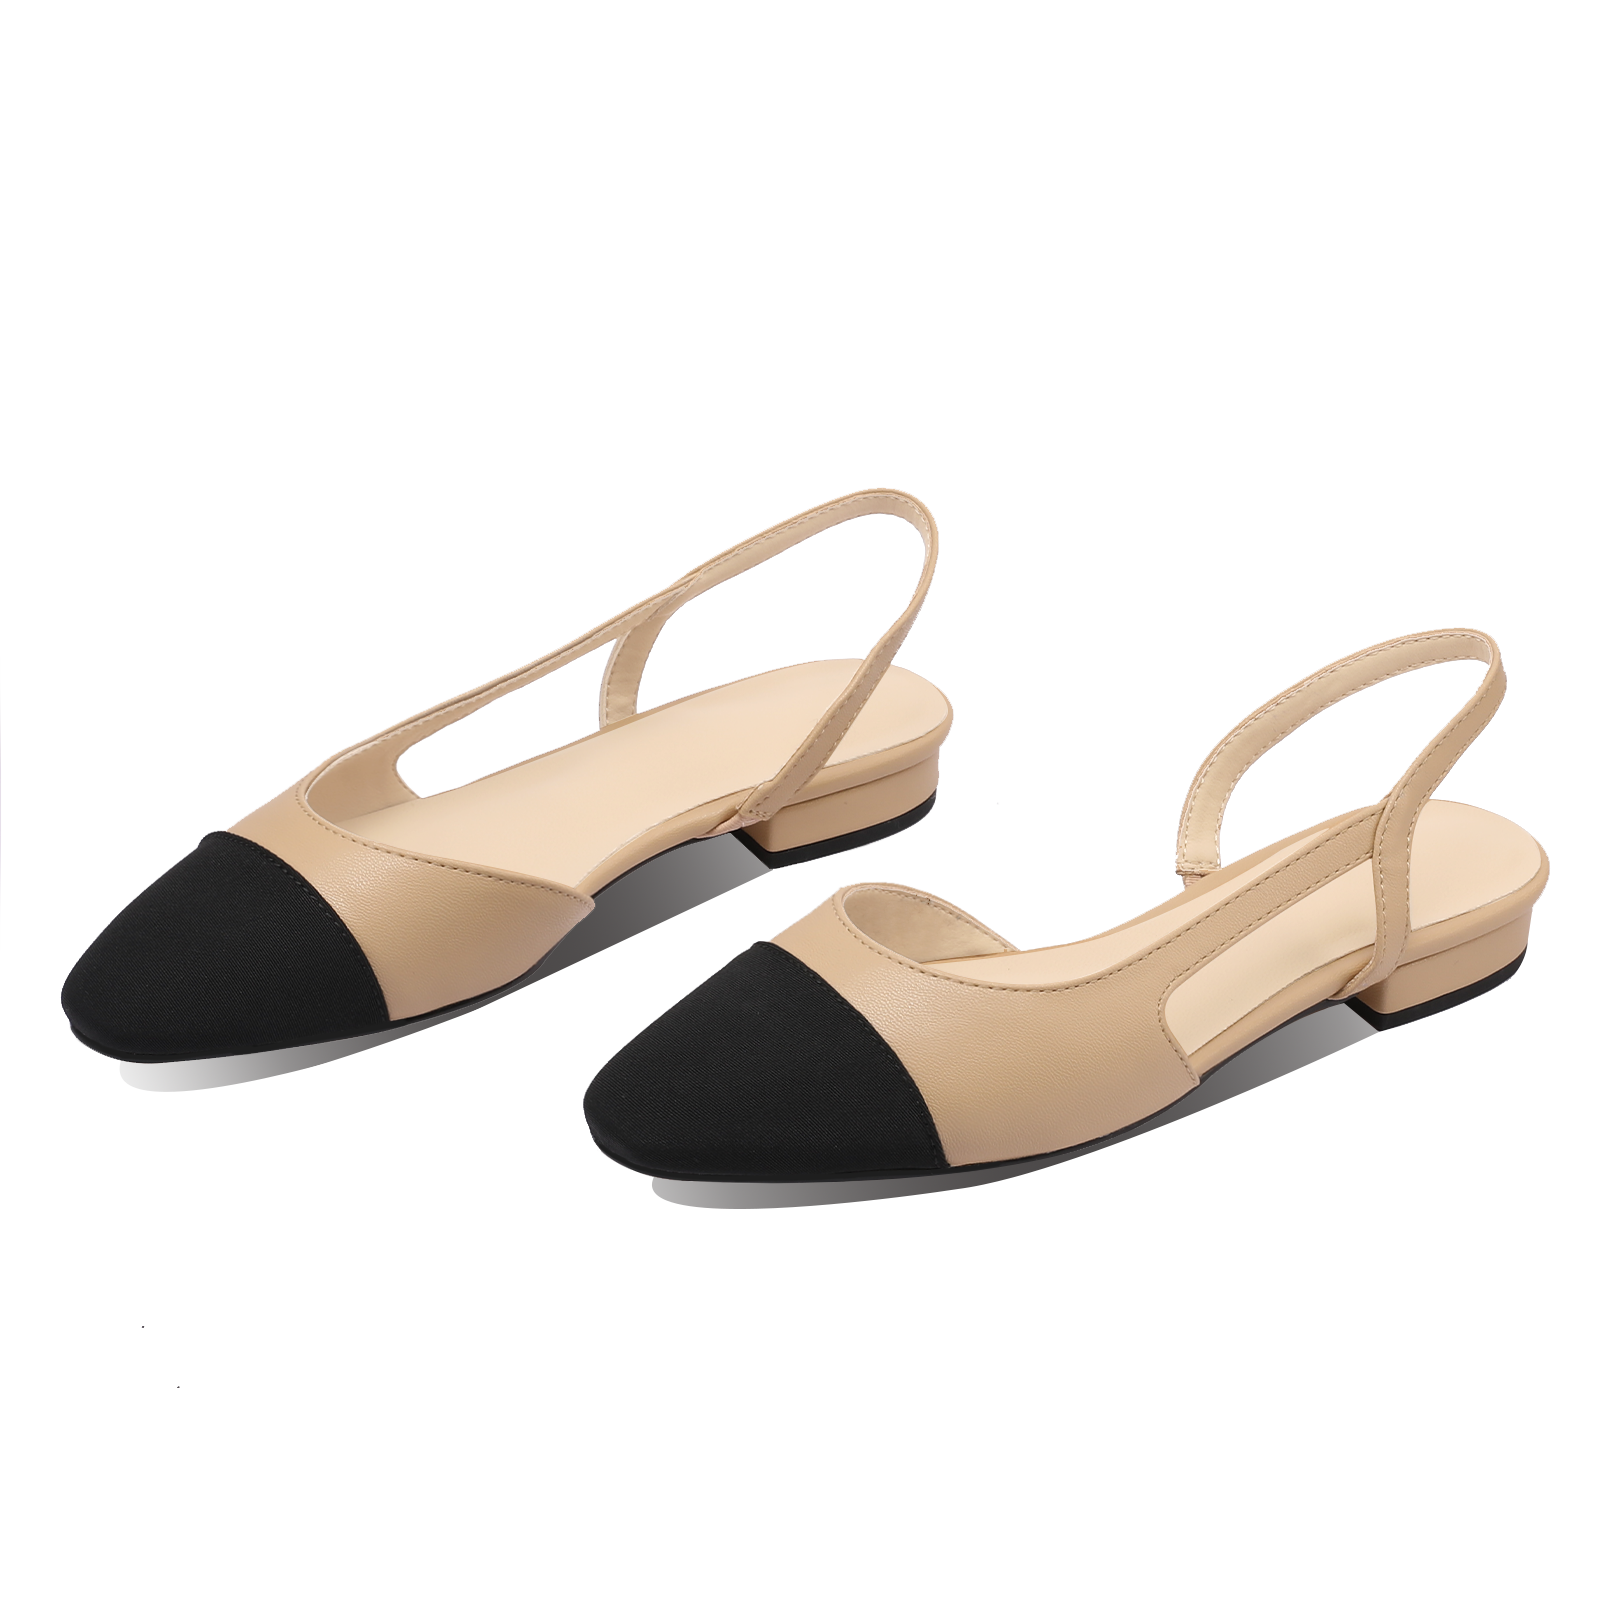  PARARICA Cap Toe Sandals Leather for Women, Two Tone Closed  Toed Slingback Slip On Low Heel Flats | Flats